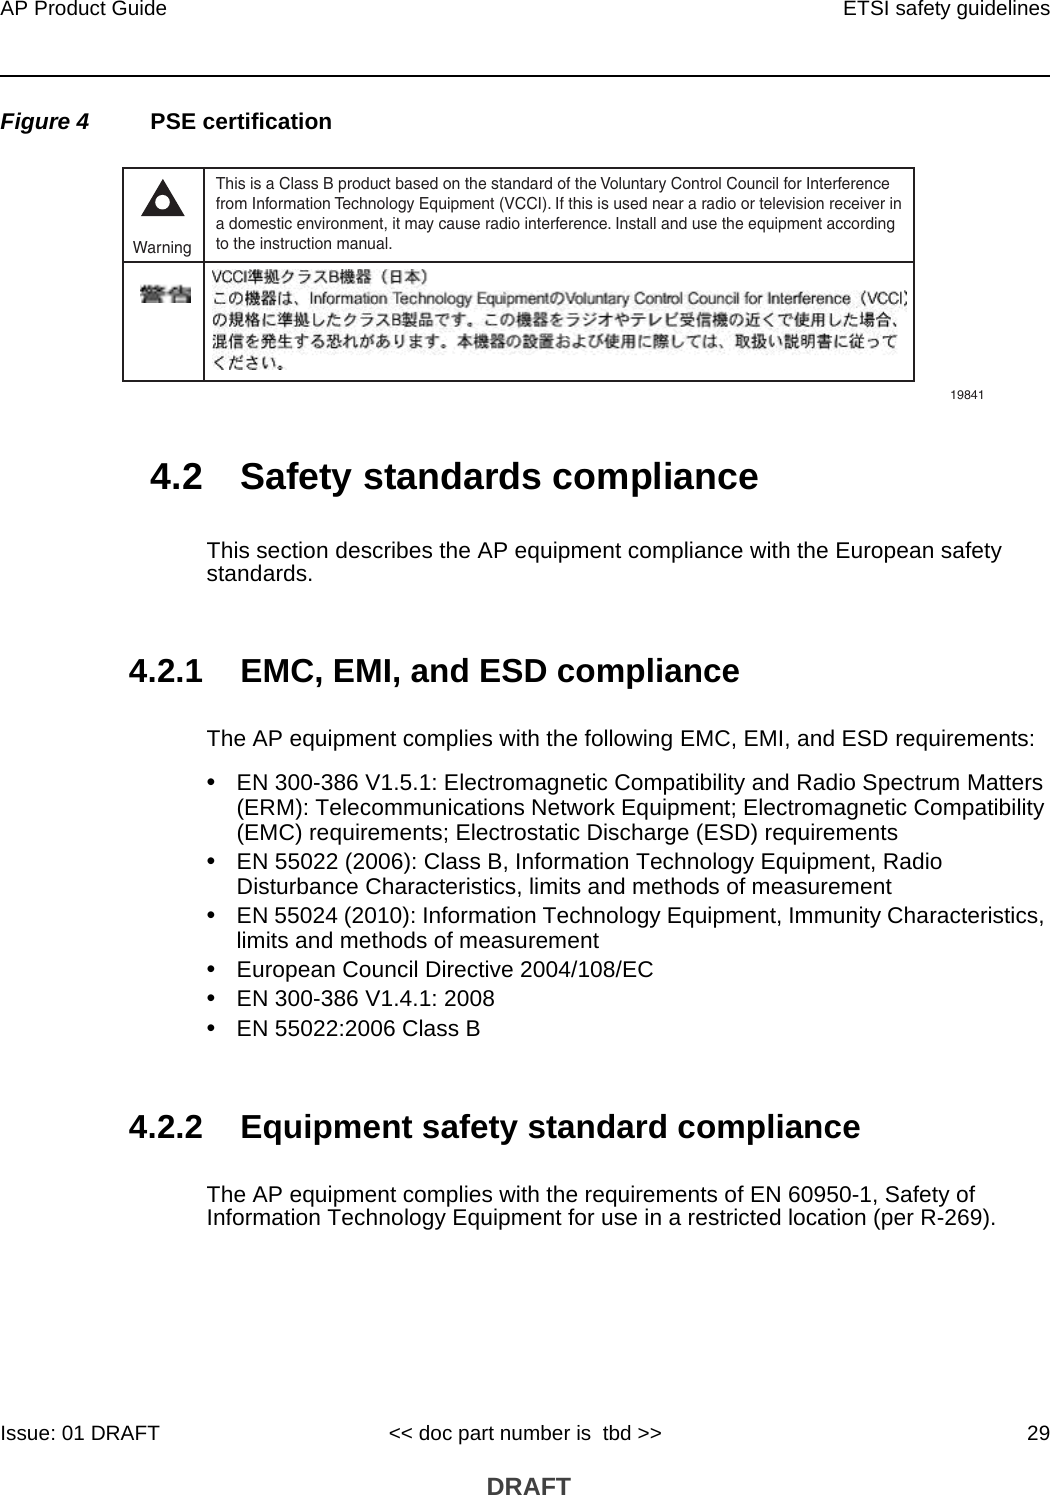 AP Product Guide ETSI safety guidelinesIssue: 01 DRAFT &lt;&lt; doc part number is  tbd &gt;&gt; 29 DRAFTFigure 4 PSE certification4.2 Safety standards complianceThis section describes the AP equipment compliance with the European safety standards.4.2.1 EMC, EMI, and ESD complianceThe AP equipment complies with the following EMC, EMI, and ESD requirements:•EN 300-386 V1.5.1: Electromagnetic Compatibility and Radio Spectrum Matters (ERM): Telecommunications Network Equipment; Electromagnetic Compatibility (EMC) requirements; Electrostatic Discharge (ESD) requirements•EN 55022 (2006): Class B, Information Technology Equipment, Radio Disturbance Characteristics, limits and methods of measurement•EN 55024 (2010): Information Technology Equipment, Immunity Characteristics, limits and methods of measurement•European Council Directive 2004/108/EC•EN 300-386 V1.4.1: 2008•EN 55022:2006 Class B4.2.2 Equipment safety standard complianceThe AP equipment complies with the requirements of EN 60950-1, Safety of Information Technology Equipment for use in a restricted location (per R-269).This is a Class B product based on the standard of the Voluntary Control Council for Interferencefrom Information Technology Equipment (VCCI). If this is used near a radio or television receiver ina domestic environment, it may cause radio interference. Install and use the equipment accordingto the instruction manual. Warning19841